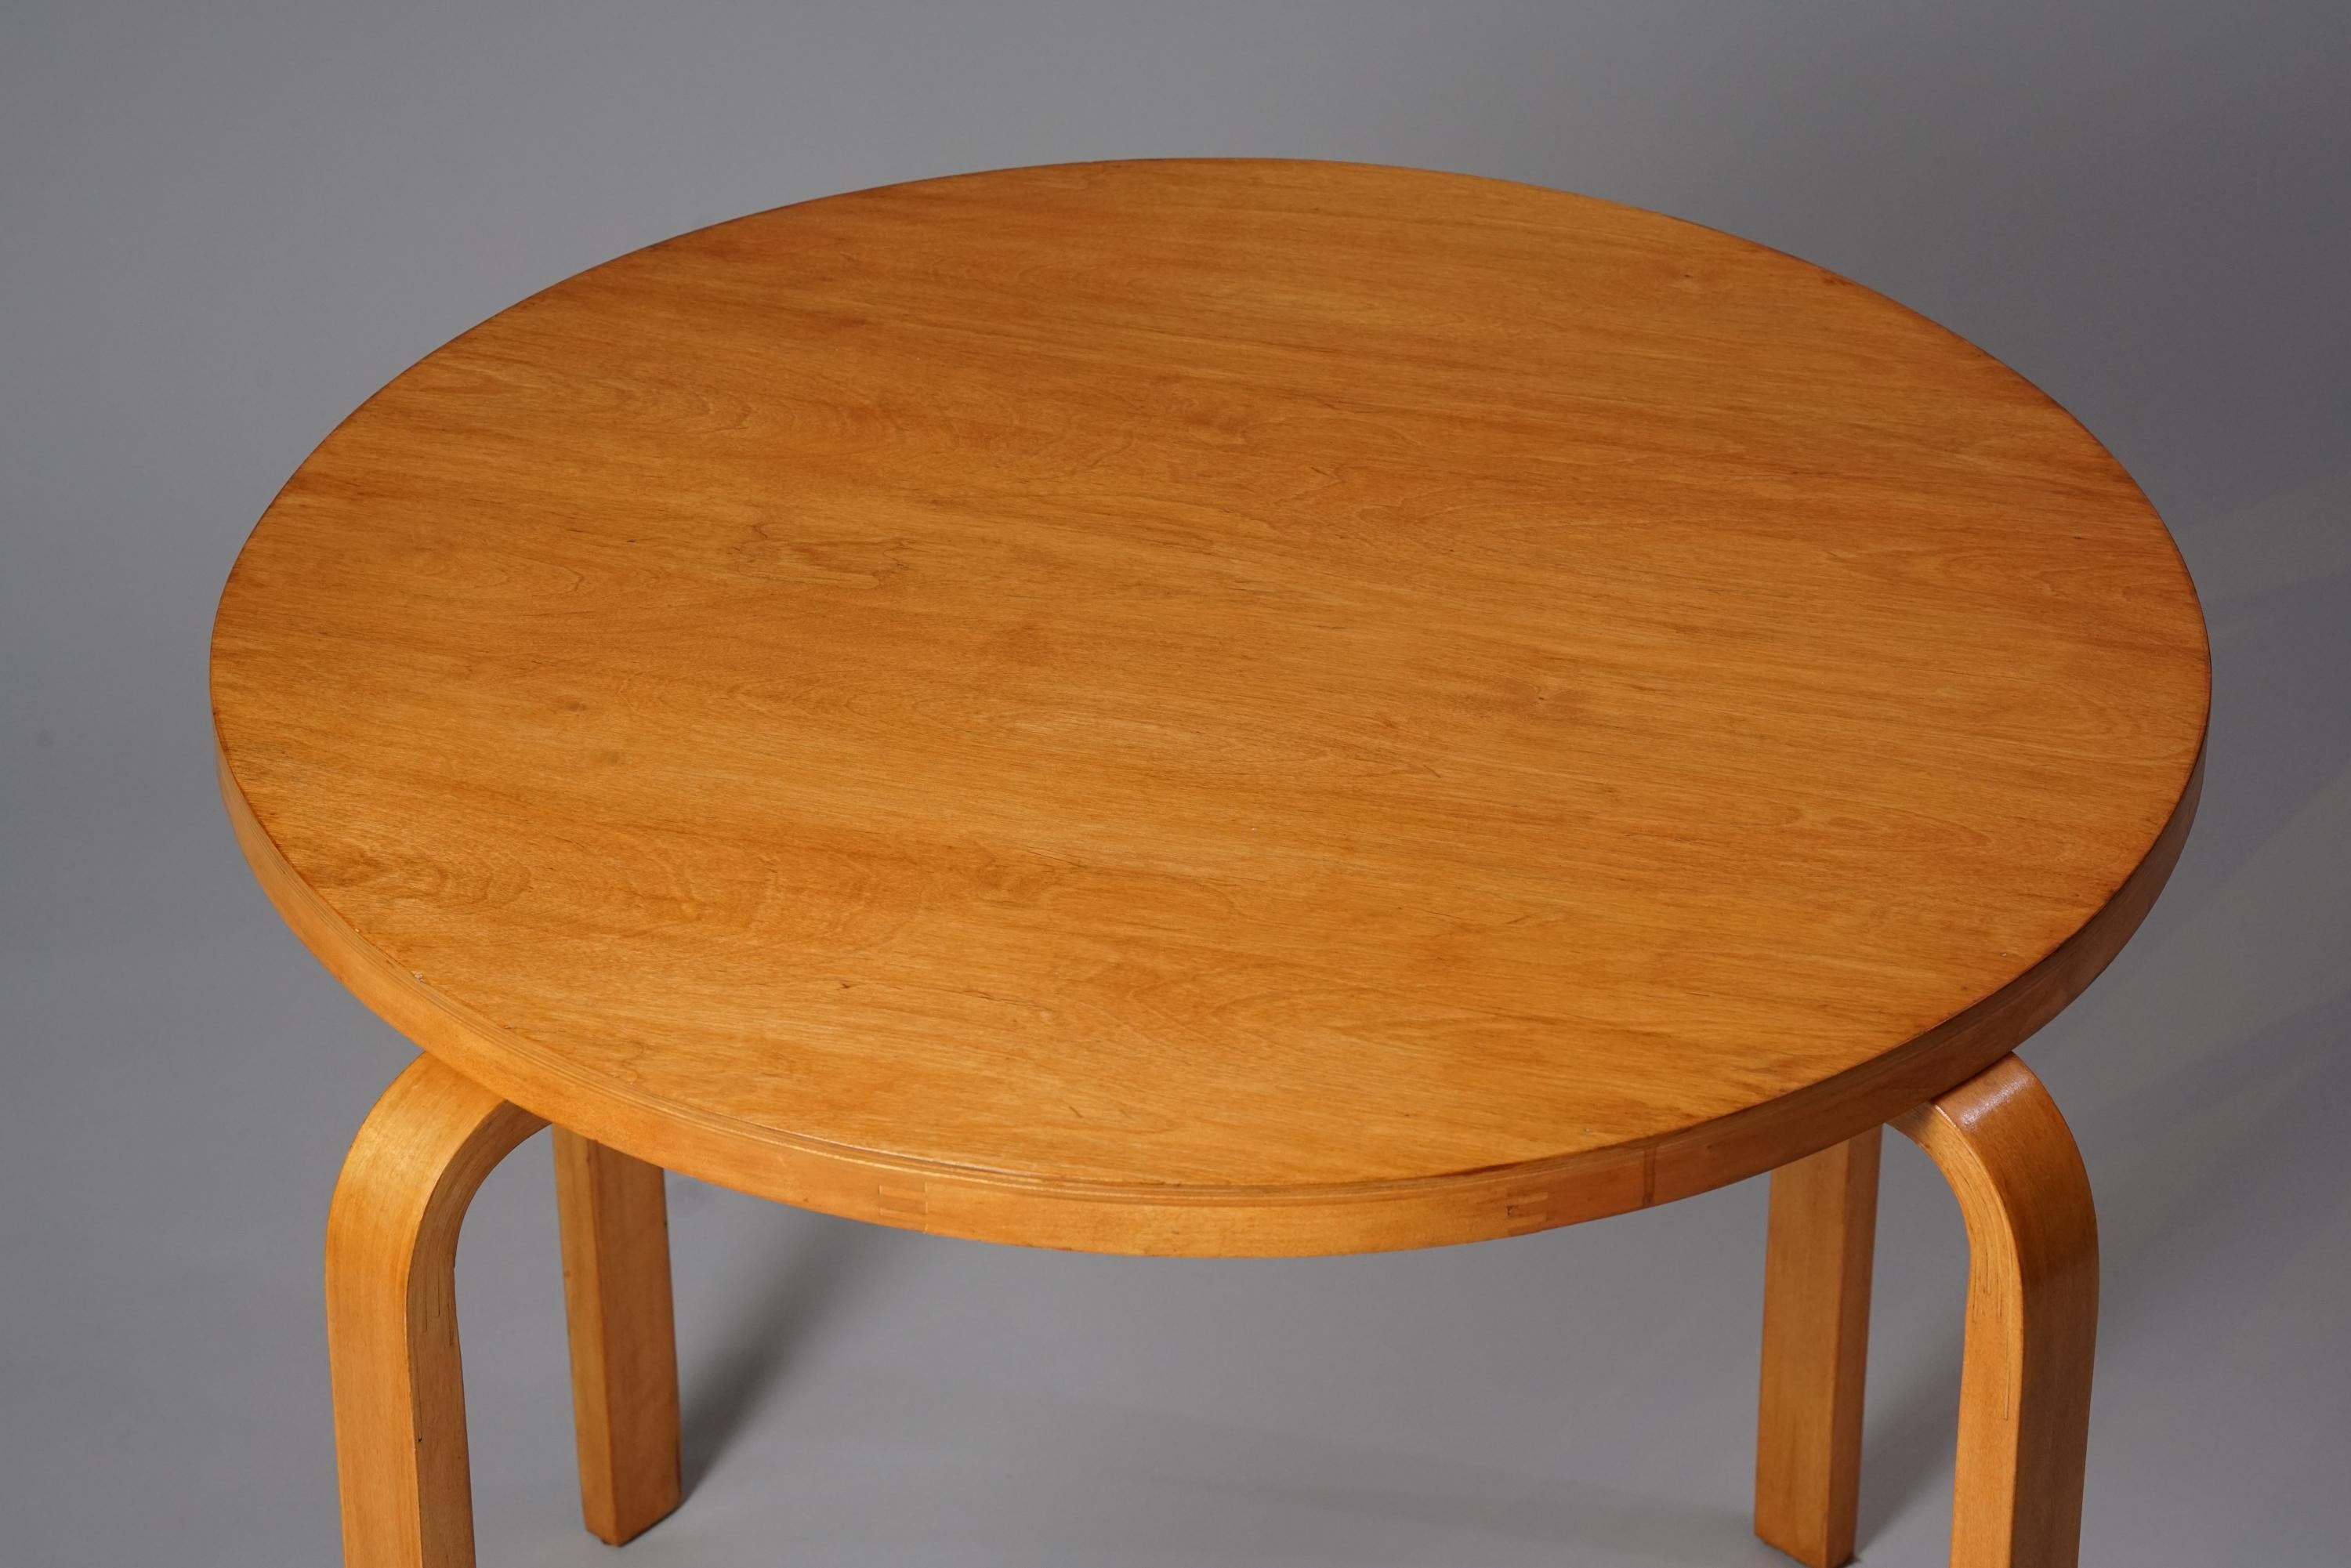 Rare Alvar Aalto dining table, manufactured by Oy Huonekalu- ja Rakennustyötehdas Ab, 1940/1950s. Birch. Good vintage condition, minor patina consistent with age and use. 

Alvar Aalto (1898-1976) is probably the most famous Finnish architect and